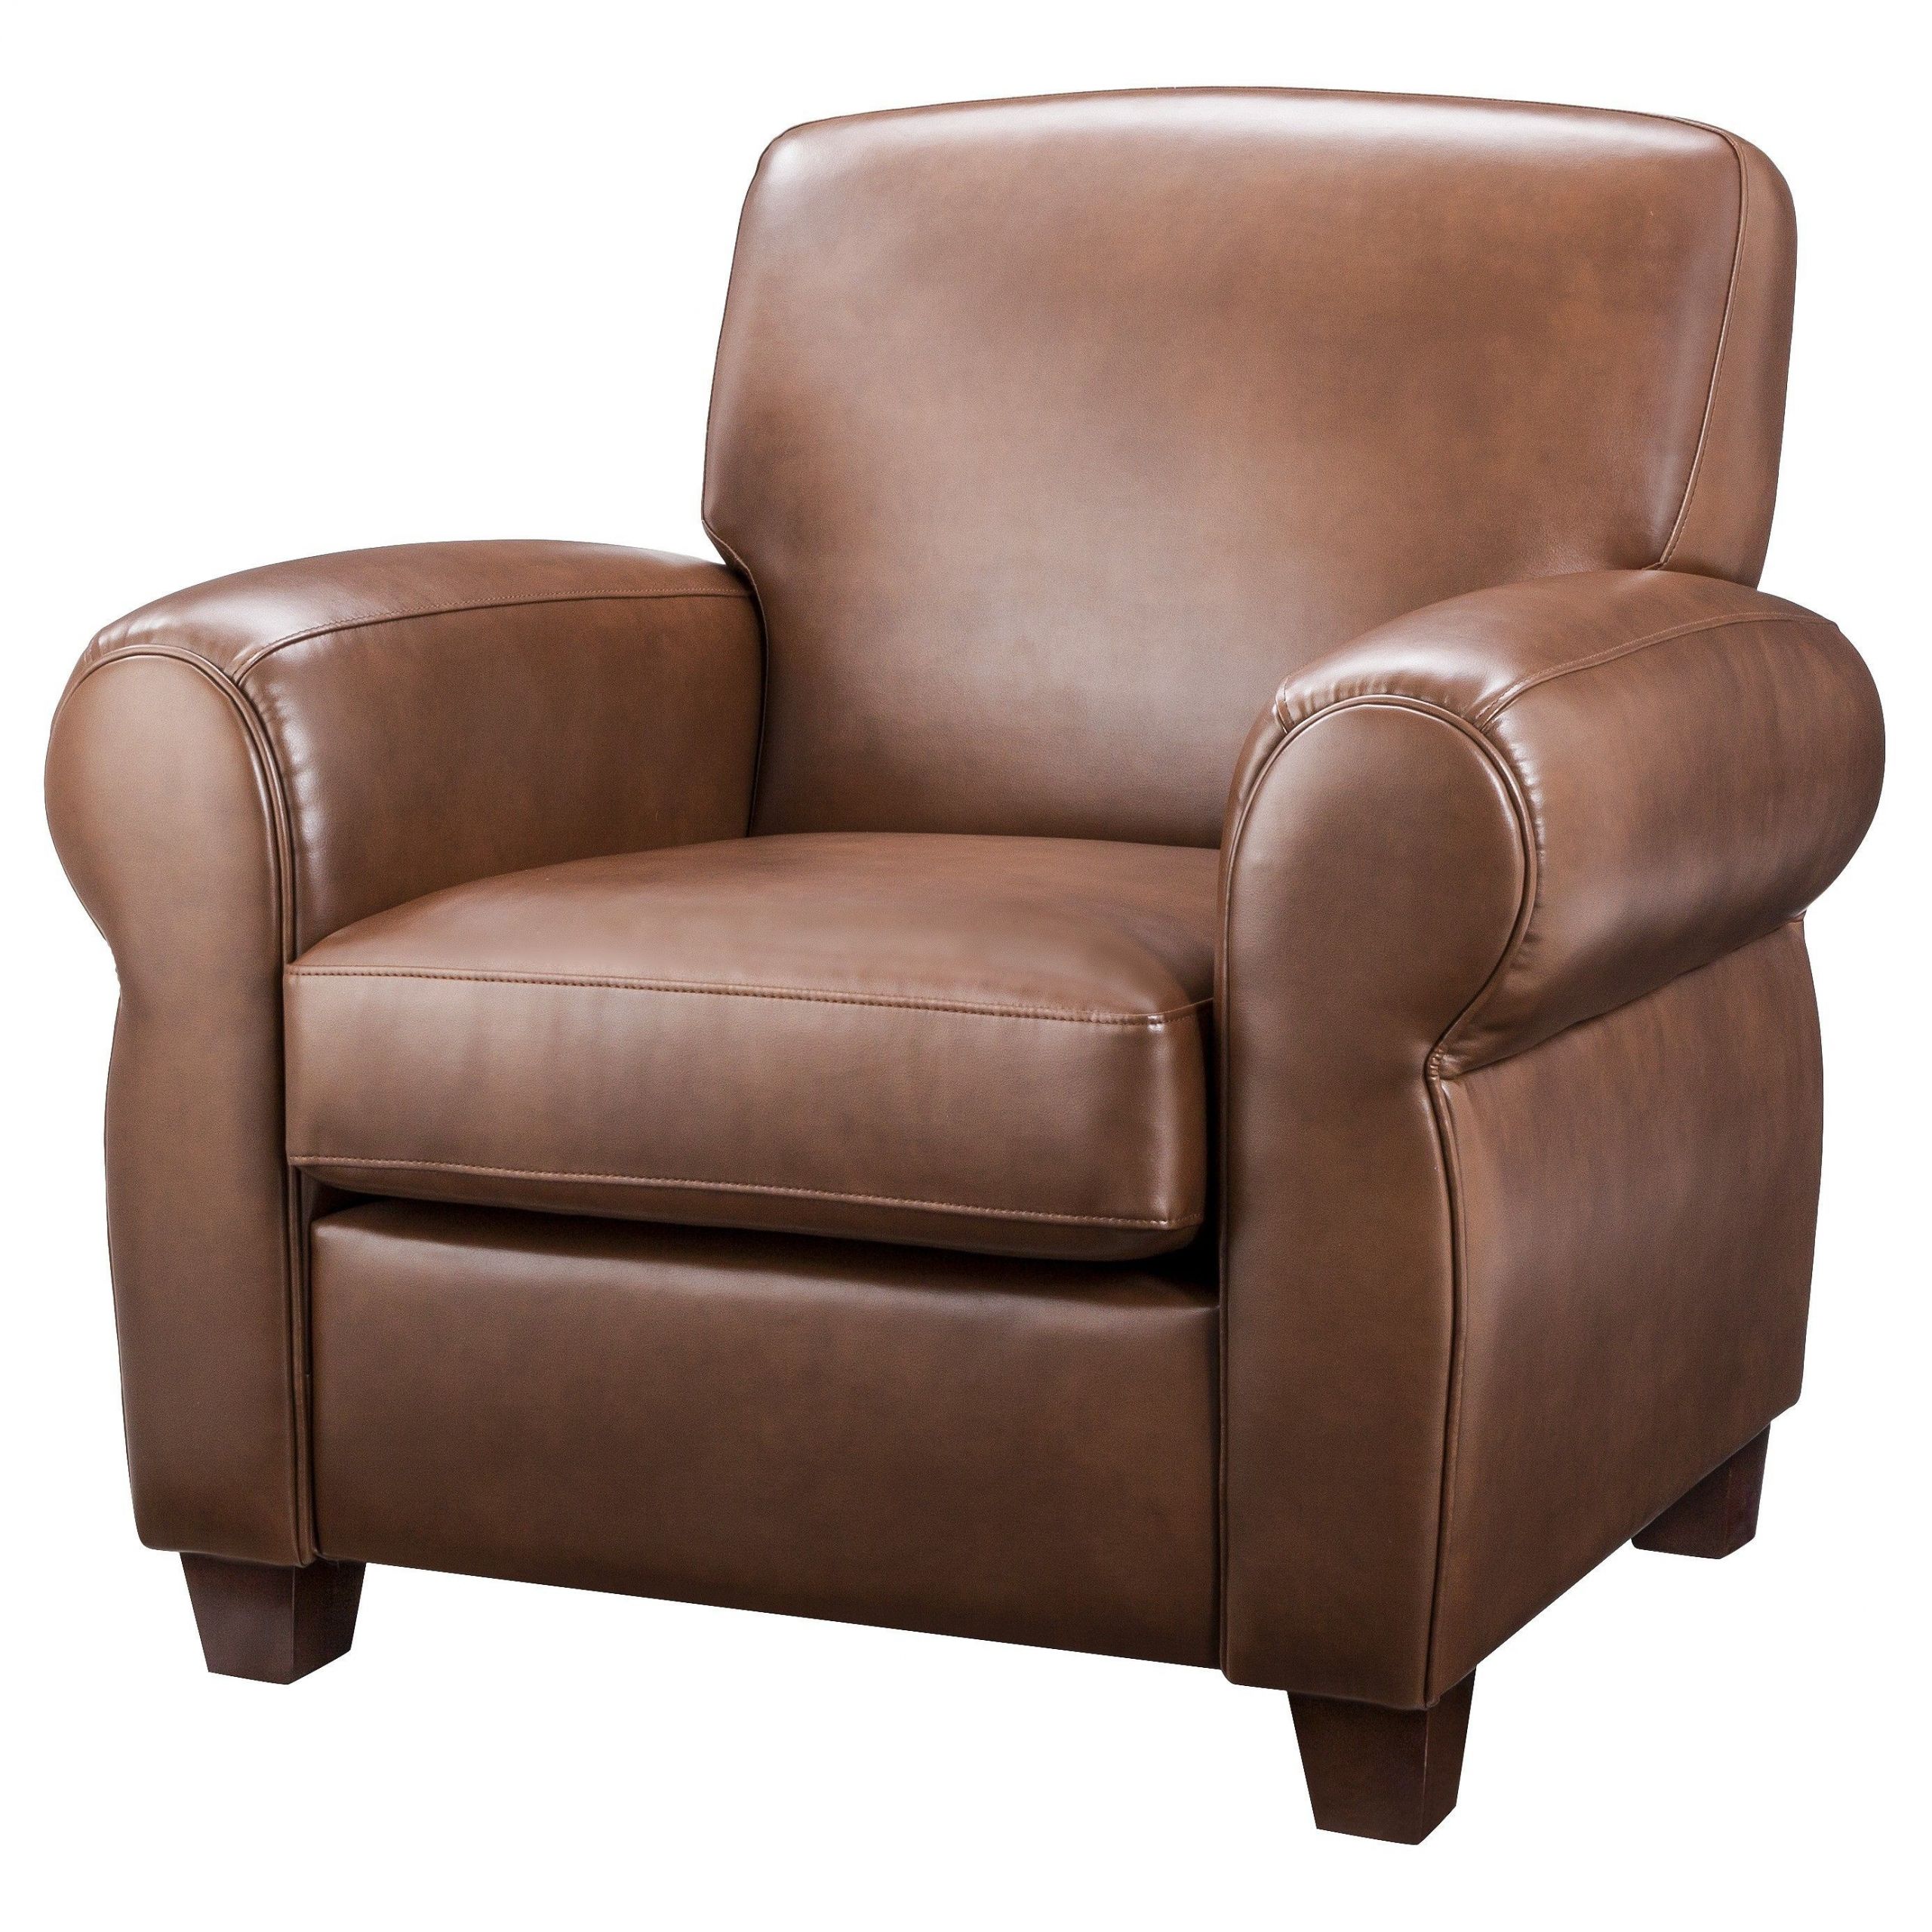 Living Room Club Chairs
 The Cigar Arm Club Chair will add a warm and inviting feel